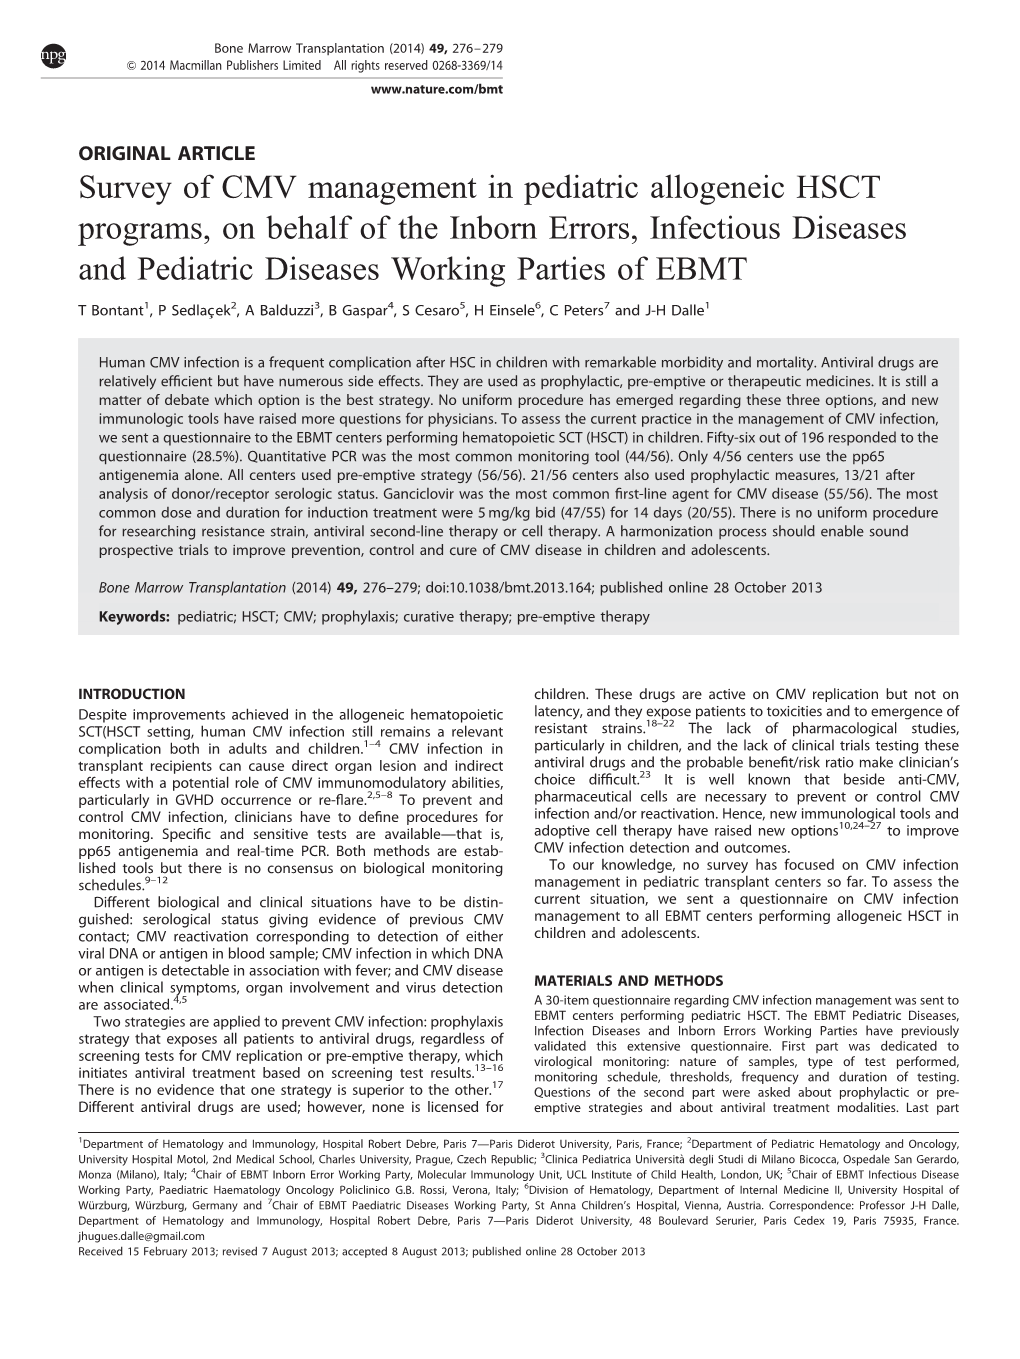 Survey of CMV Management in Pediatric Allogeneic HSCT Programs, on Behalf of the Inborn Errors, Infectious Diseases and Pediatric Diseases Working Parties of EBMT